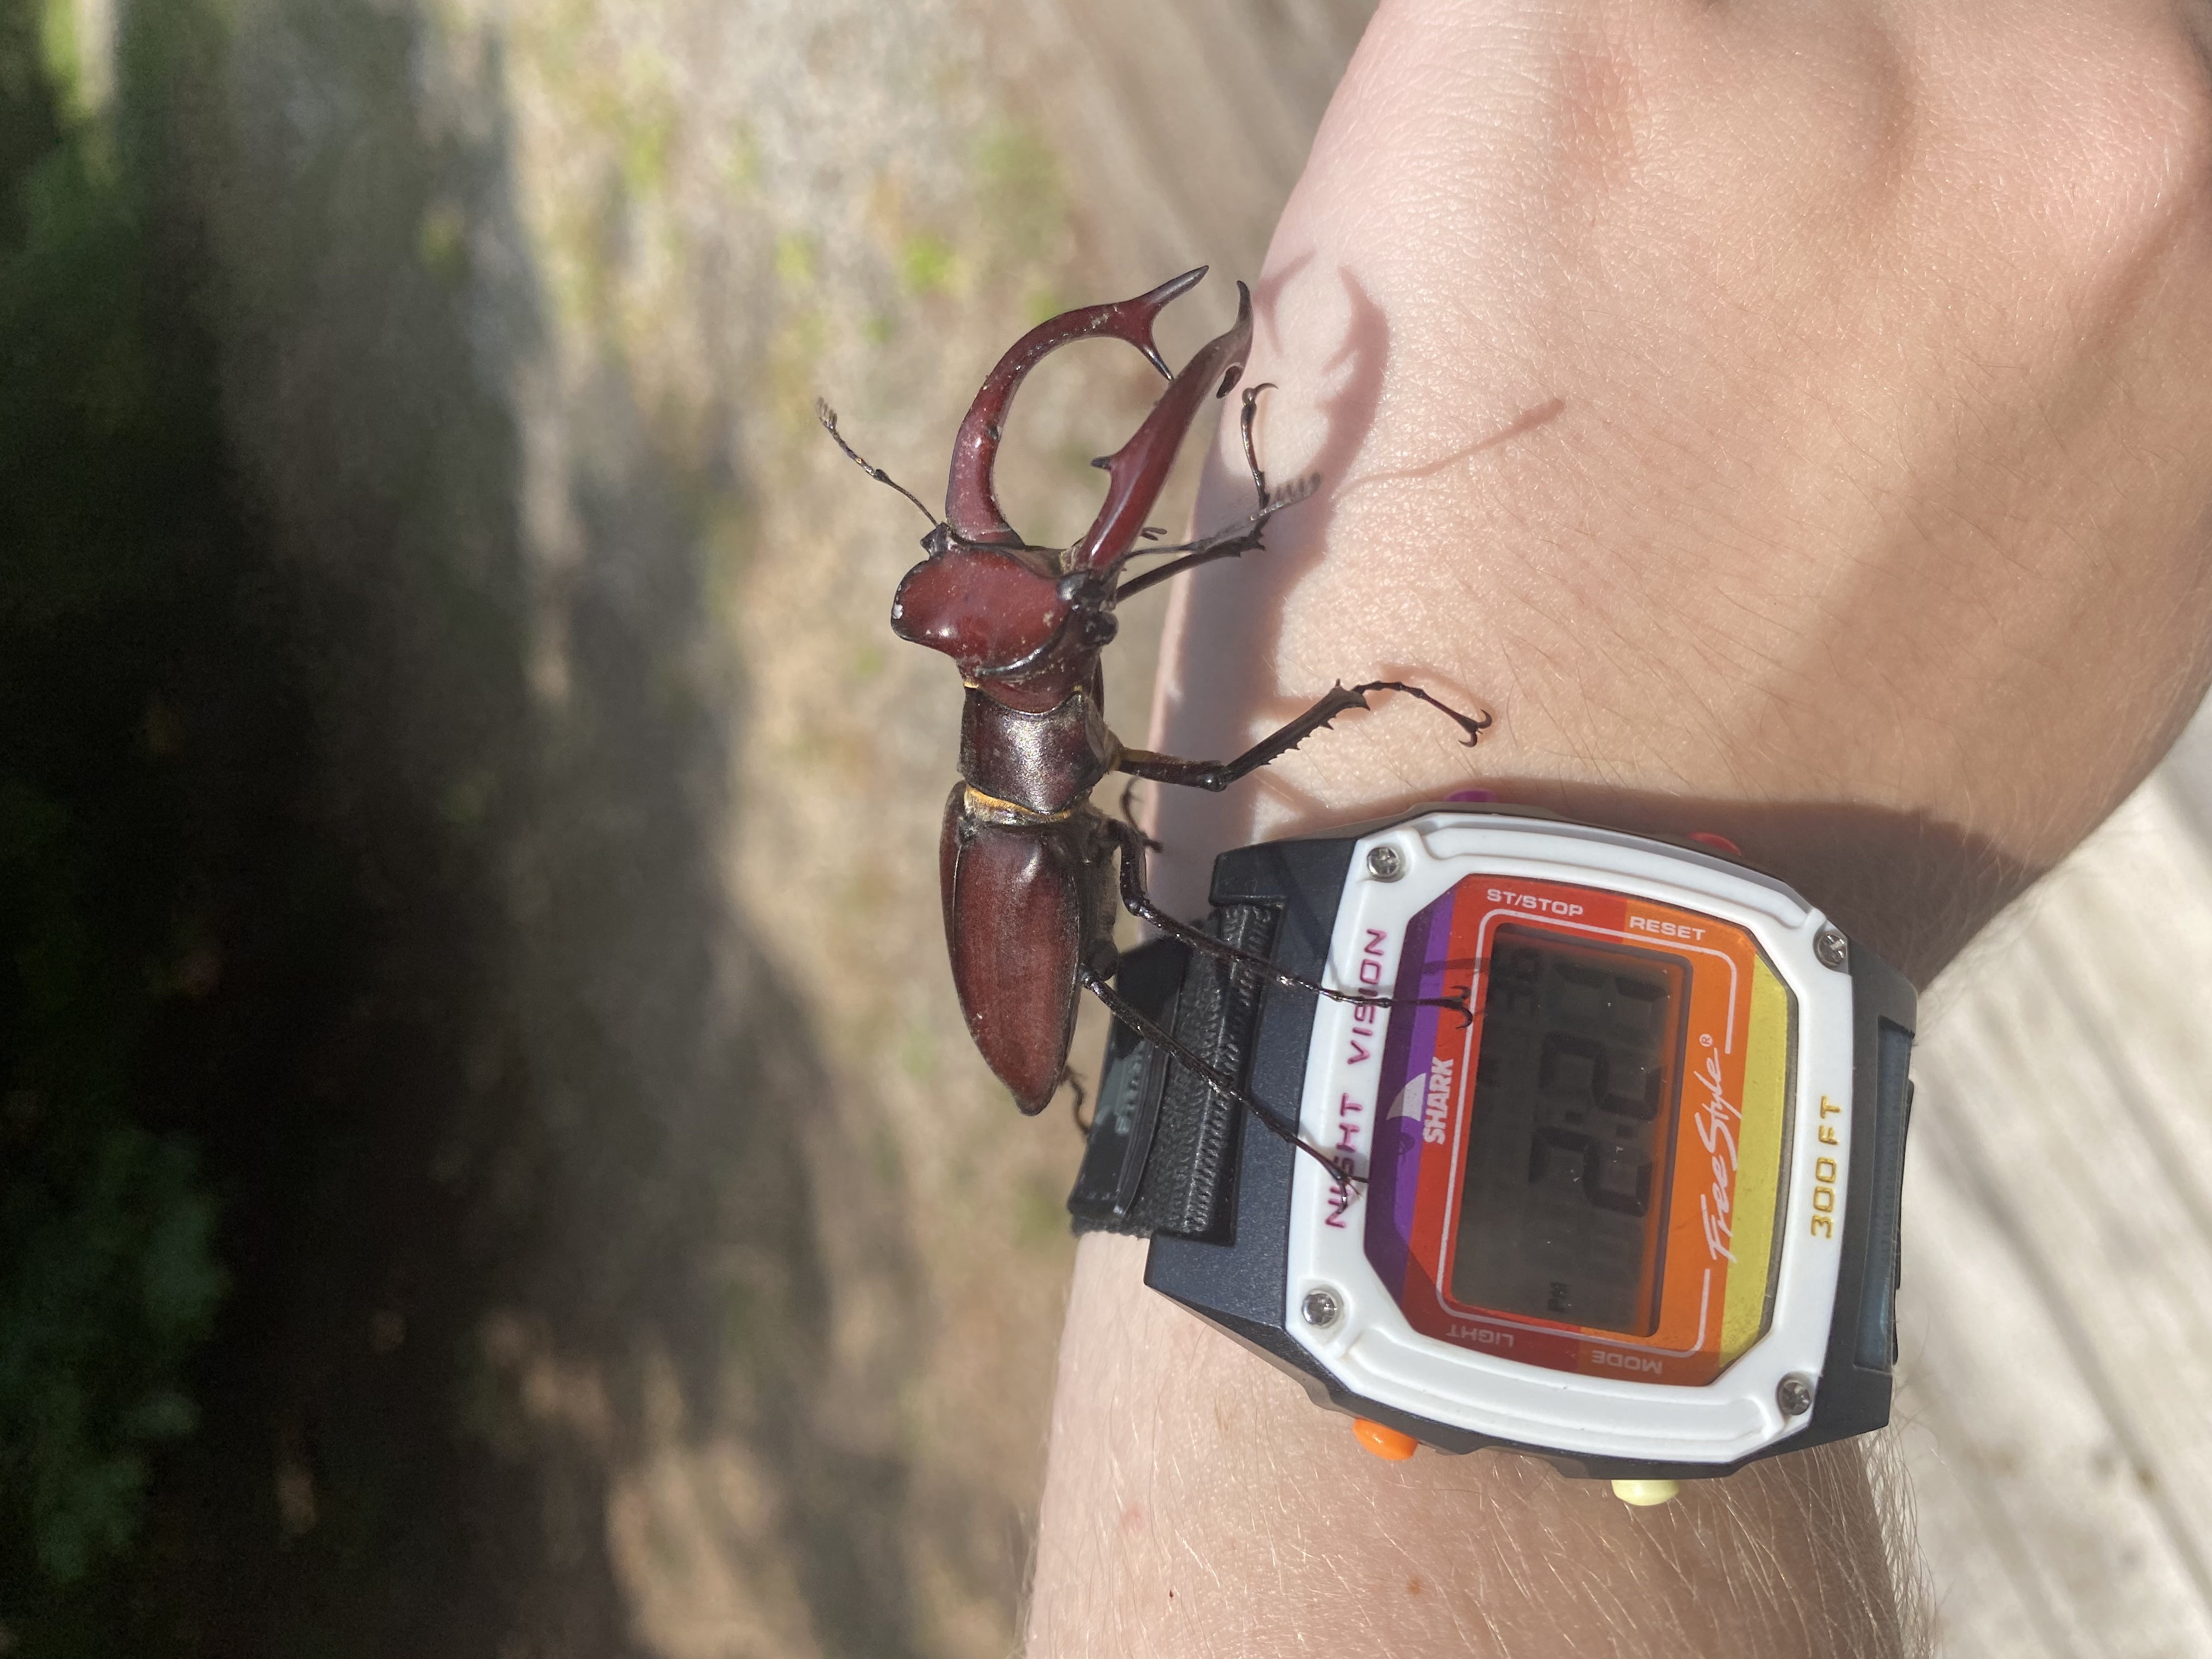 A friendly stag beetle on Meredith's arm.